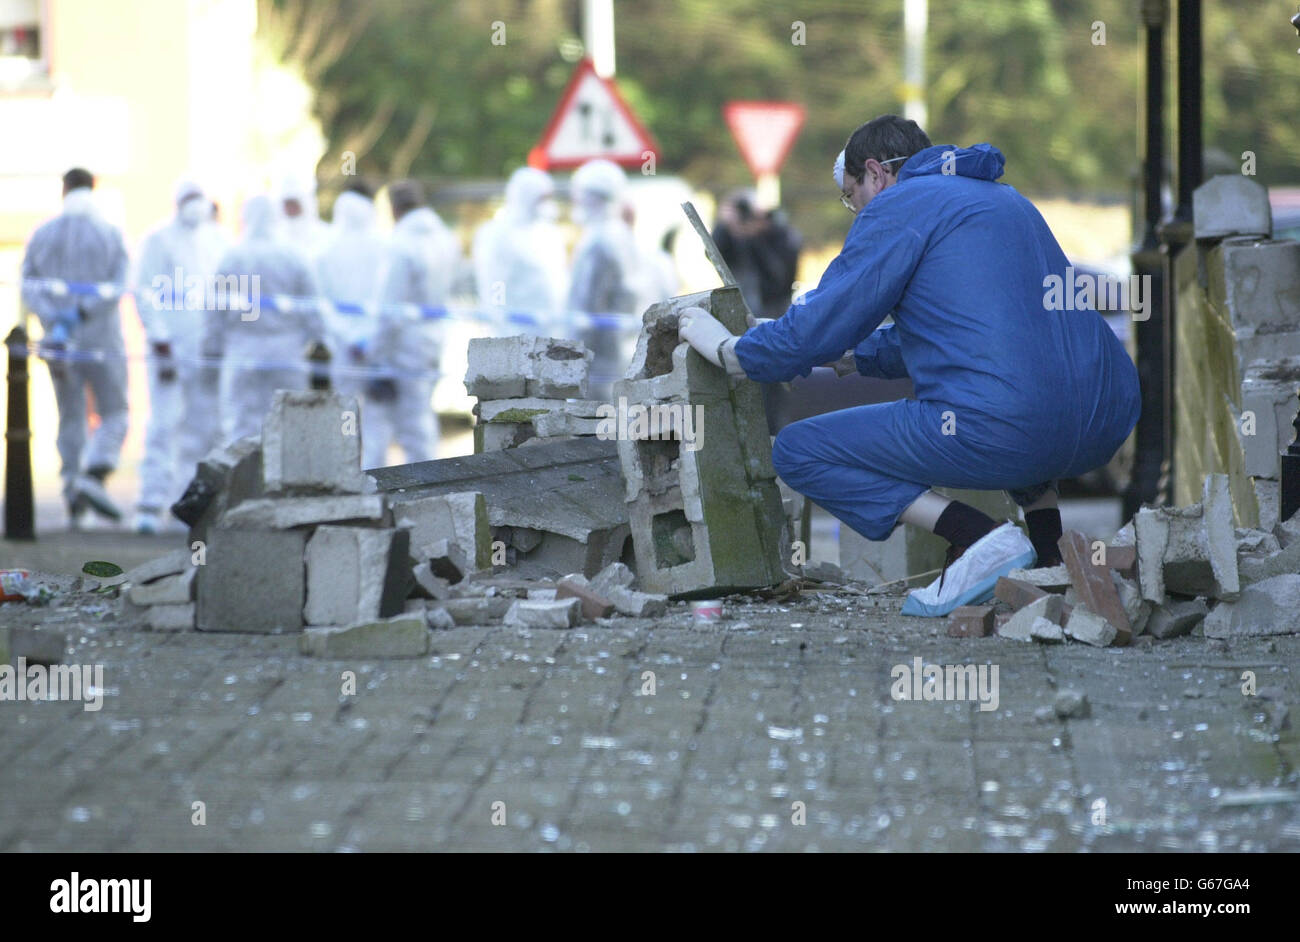 Police forensics teams examine rubble from a blast outside Enniskillen Town Hall, Enniskillen, County Fermanagh, Northern Ireland. As Prime Minister Tony Blair and Irish premier Bertie Ahern prepared for talks tomorrow in Hillsborough Castle, * .. with the province's parties to revive devolution, the Continuity IRA claimed it planted the bomb which exploded last night at around 7.10pm. Stock Photo